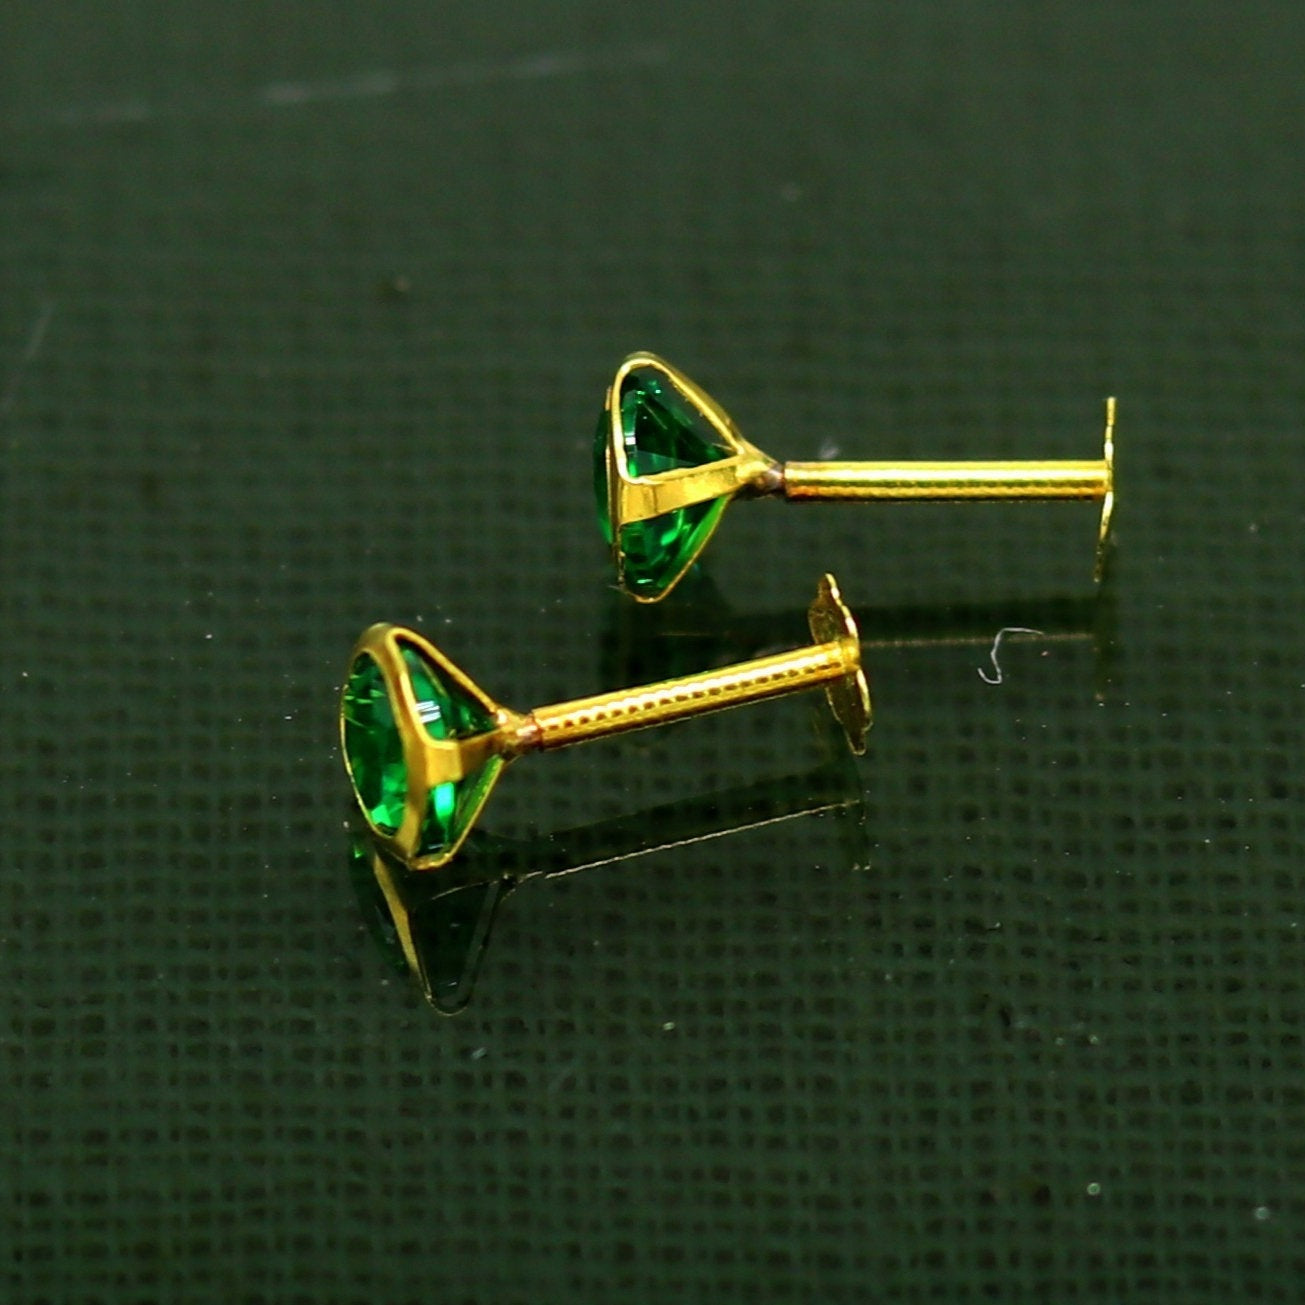 4mm 18k yellow gold handmade fabulous green cubic zircon stone excellent antique vintage design stud earrings pair unisex jewelry er115 - TRIBAL ORNAMENTS